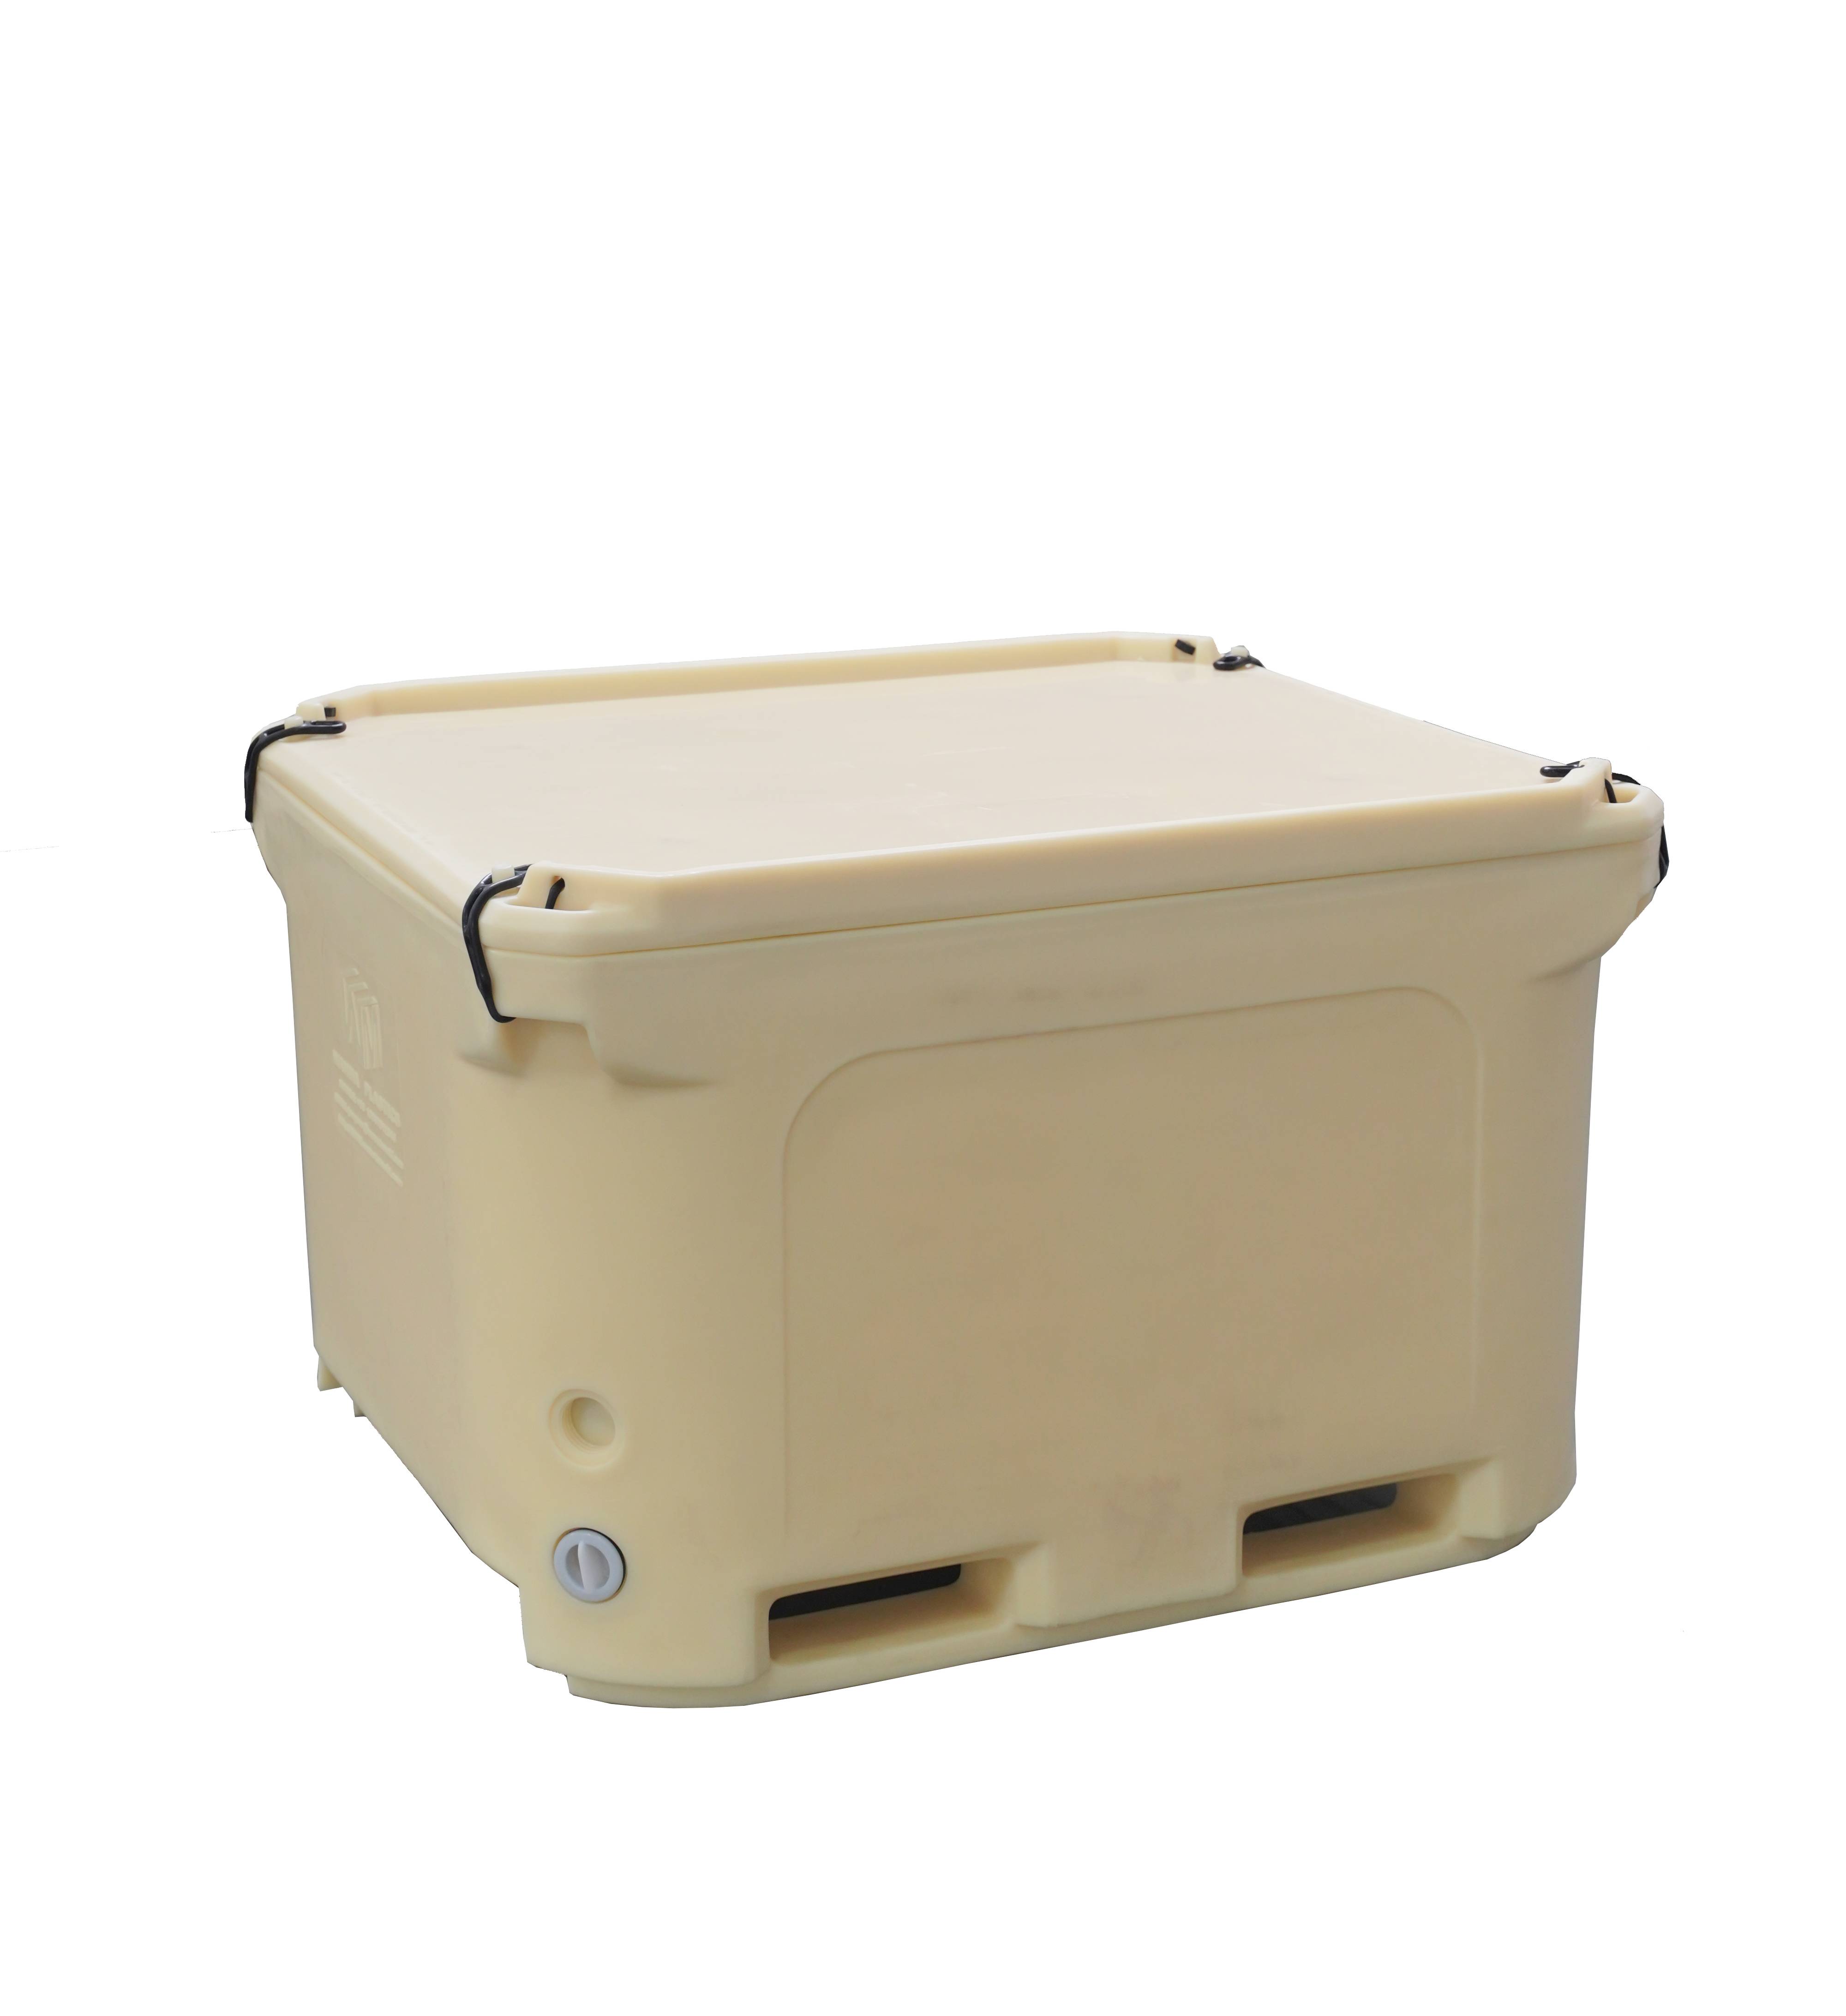 New Arrival China Cold Chain Box - Low MOQ for China FDA Approval 660L Insulated Fish Bin to Keep Fish Cold and Fresh – Wanma Rotomold